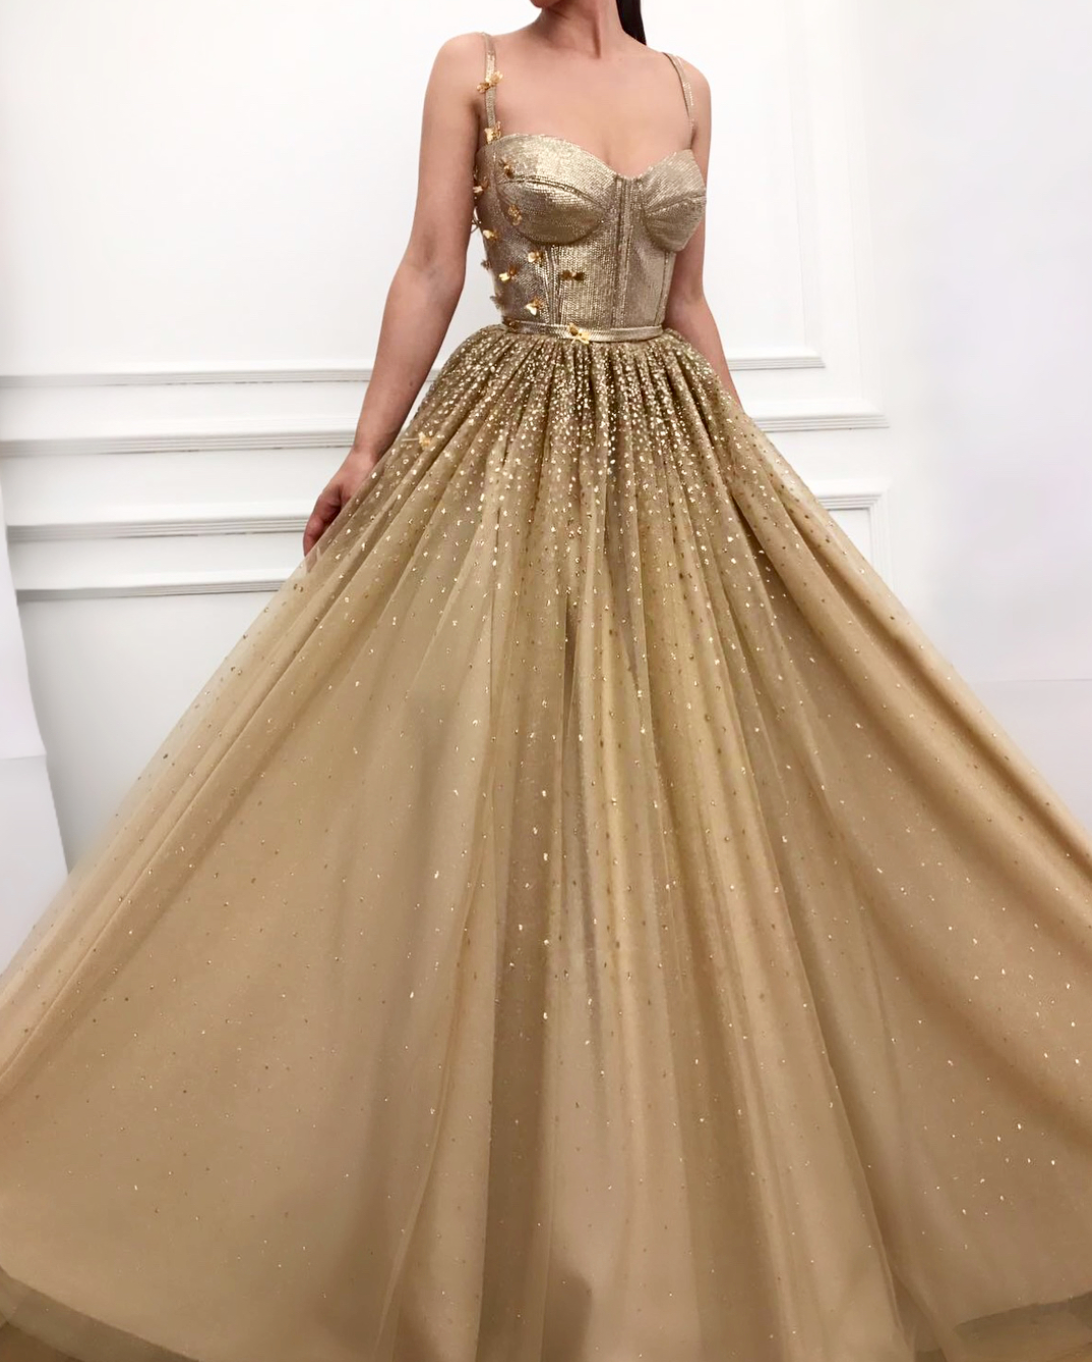 Gold A-Line dress with spaghetti straps and embroidery